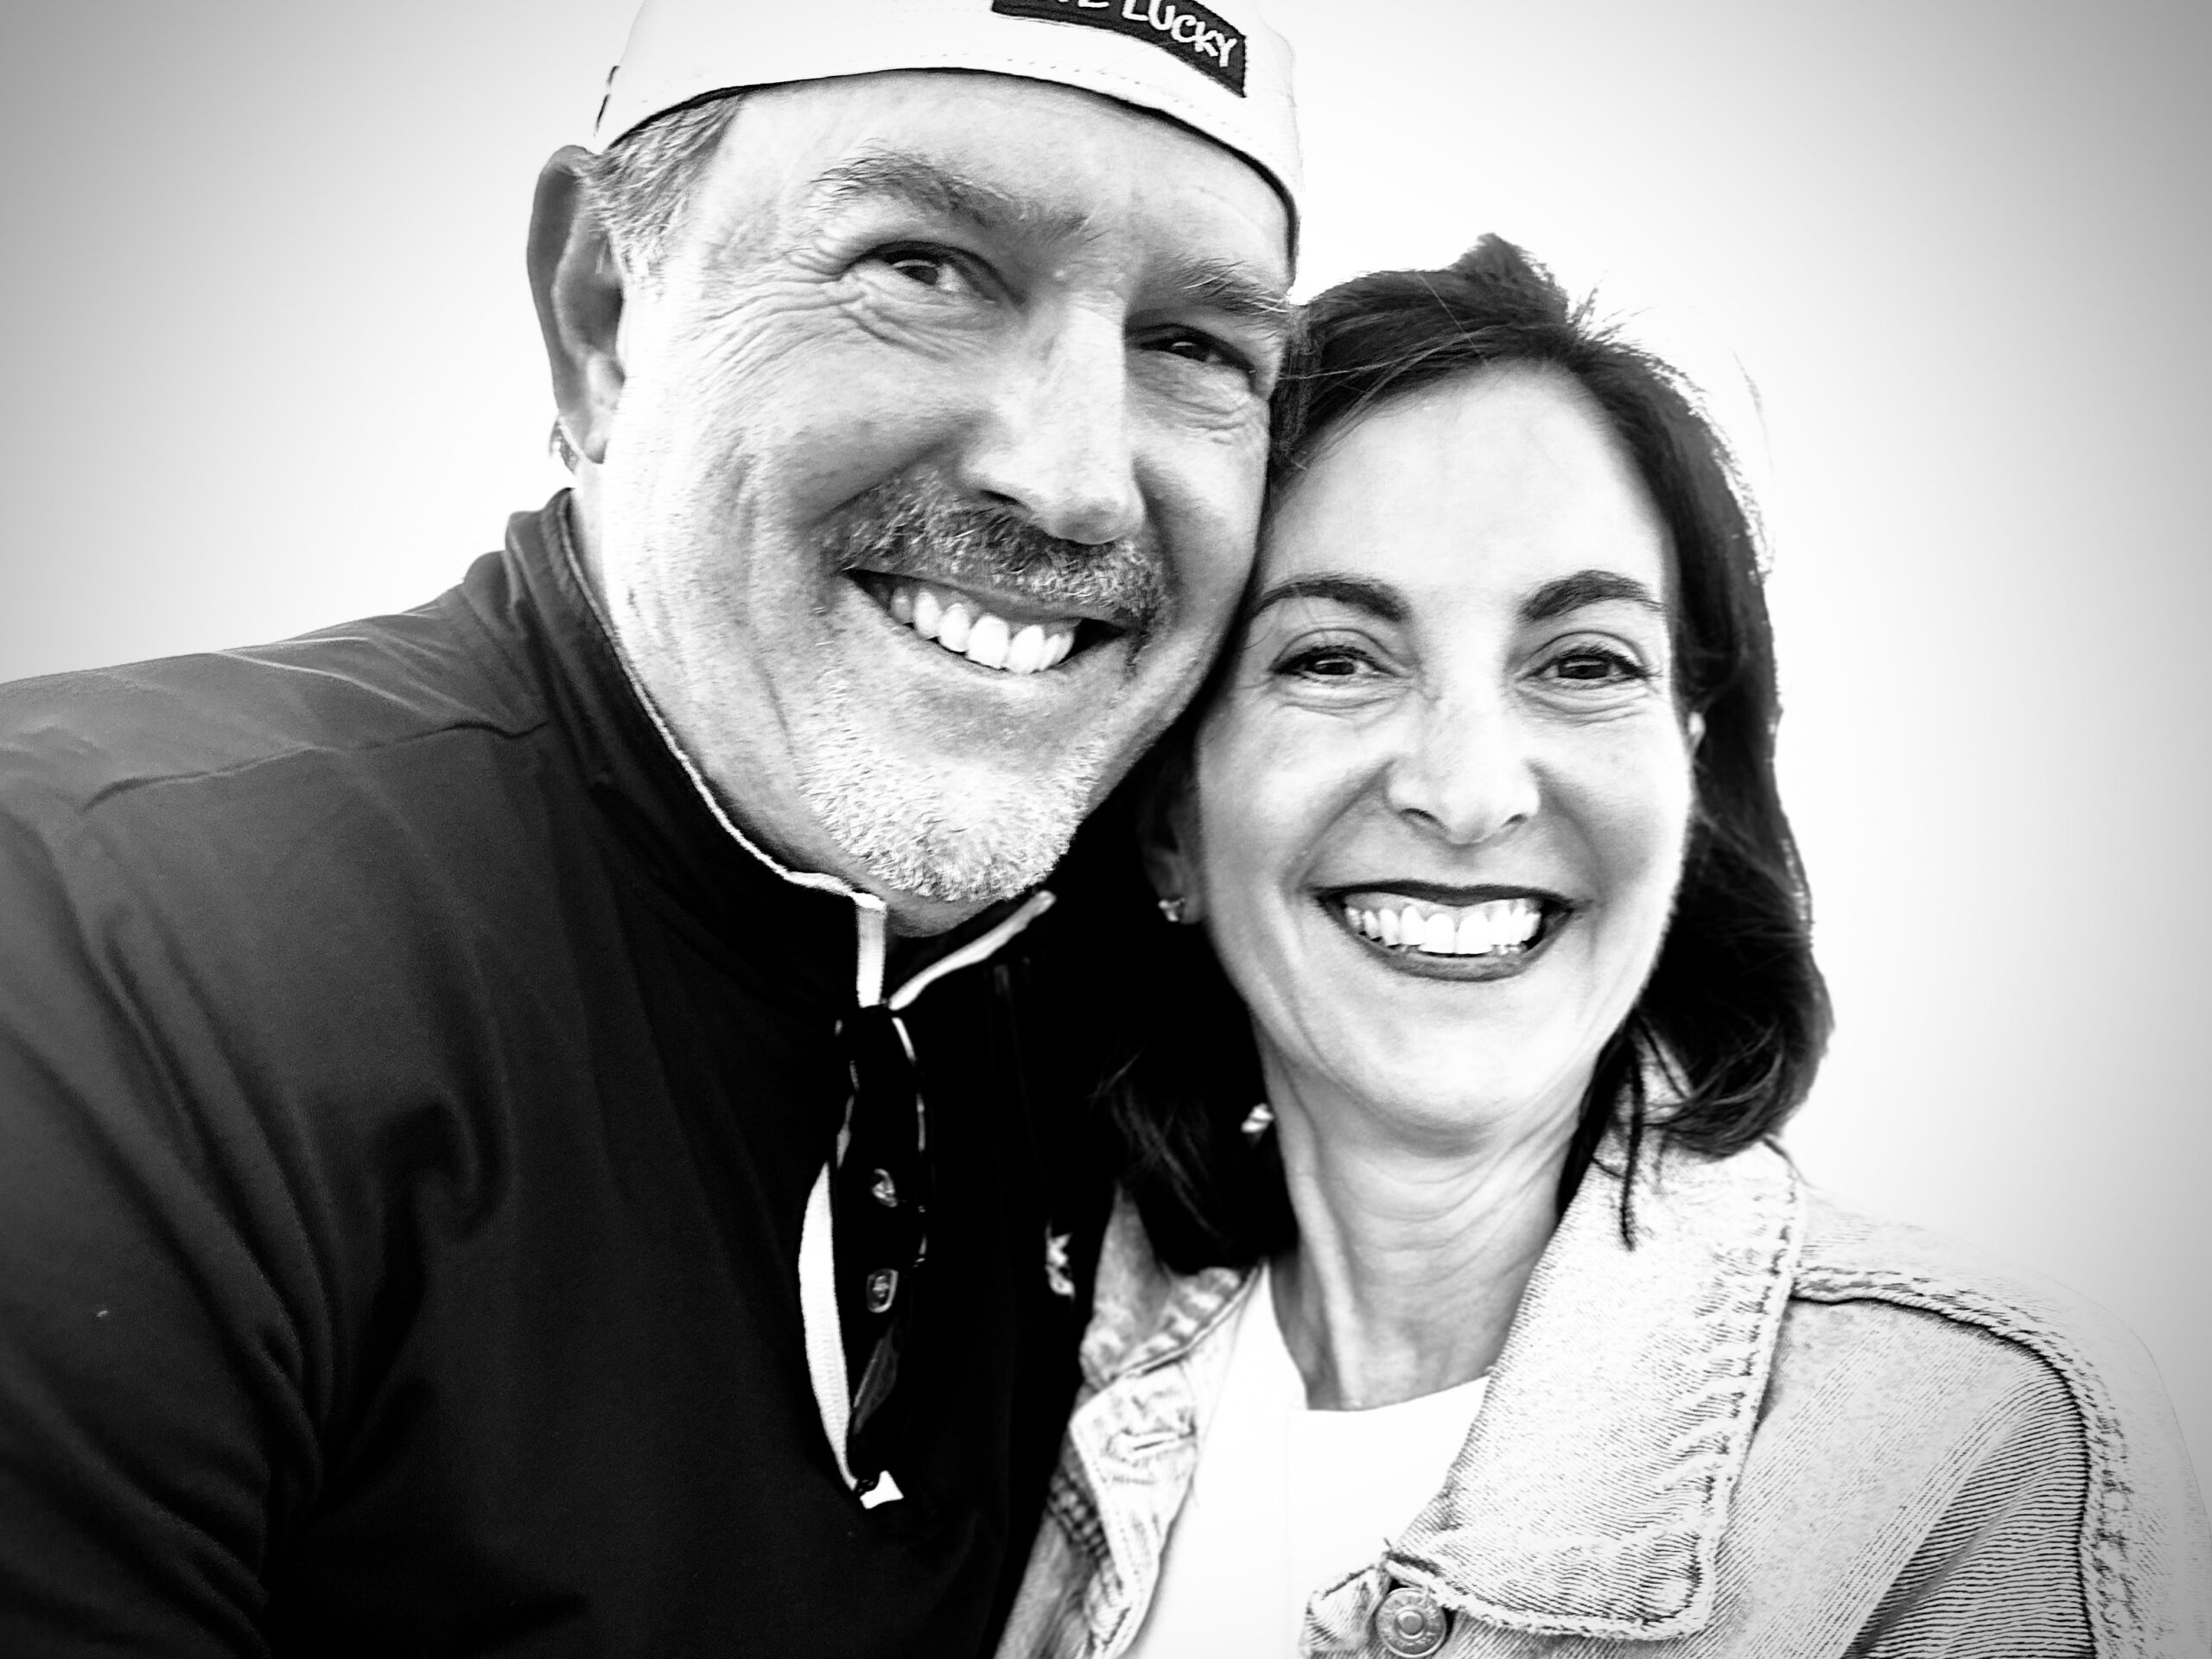 A black and white photo of a man and woman smiling.